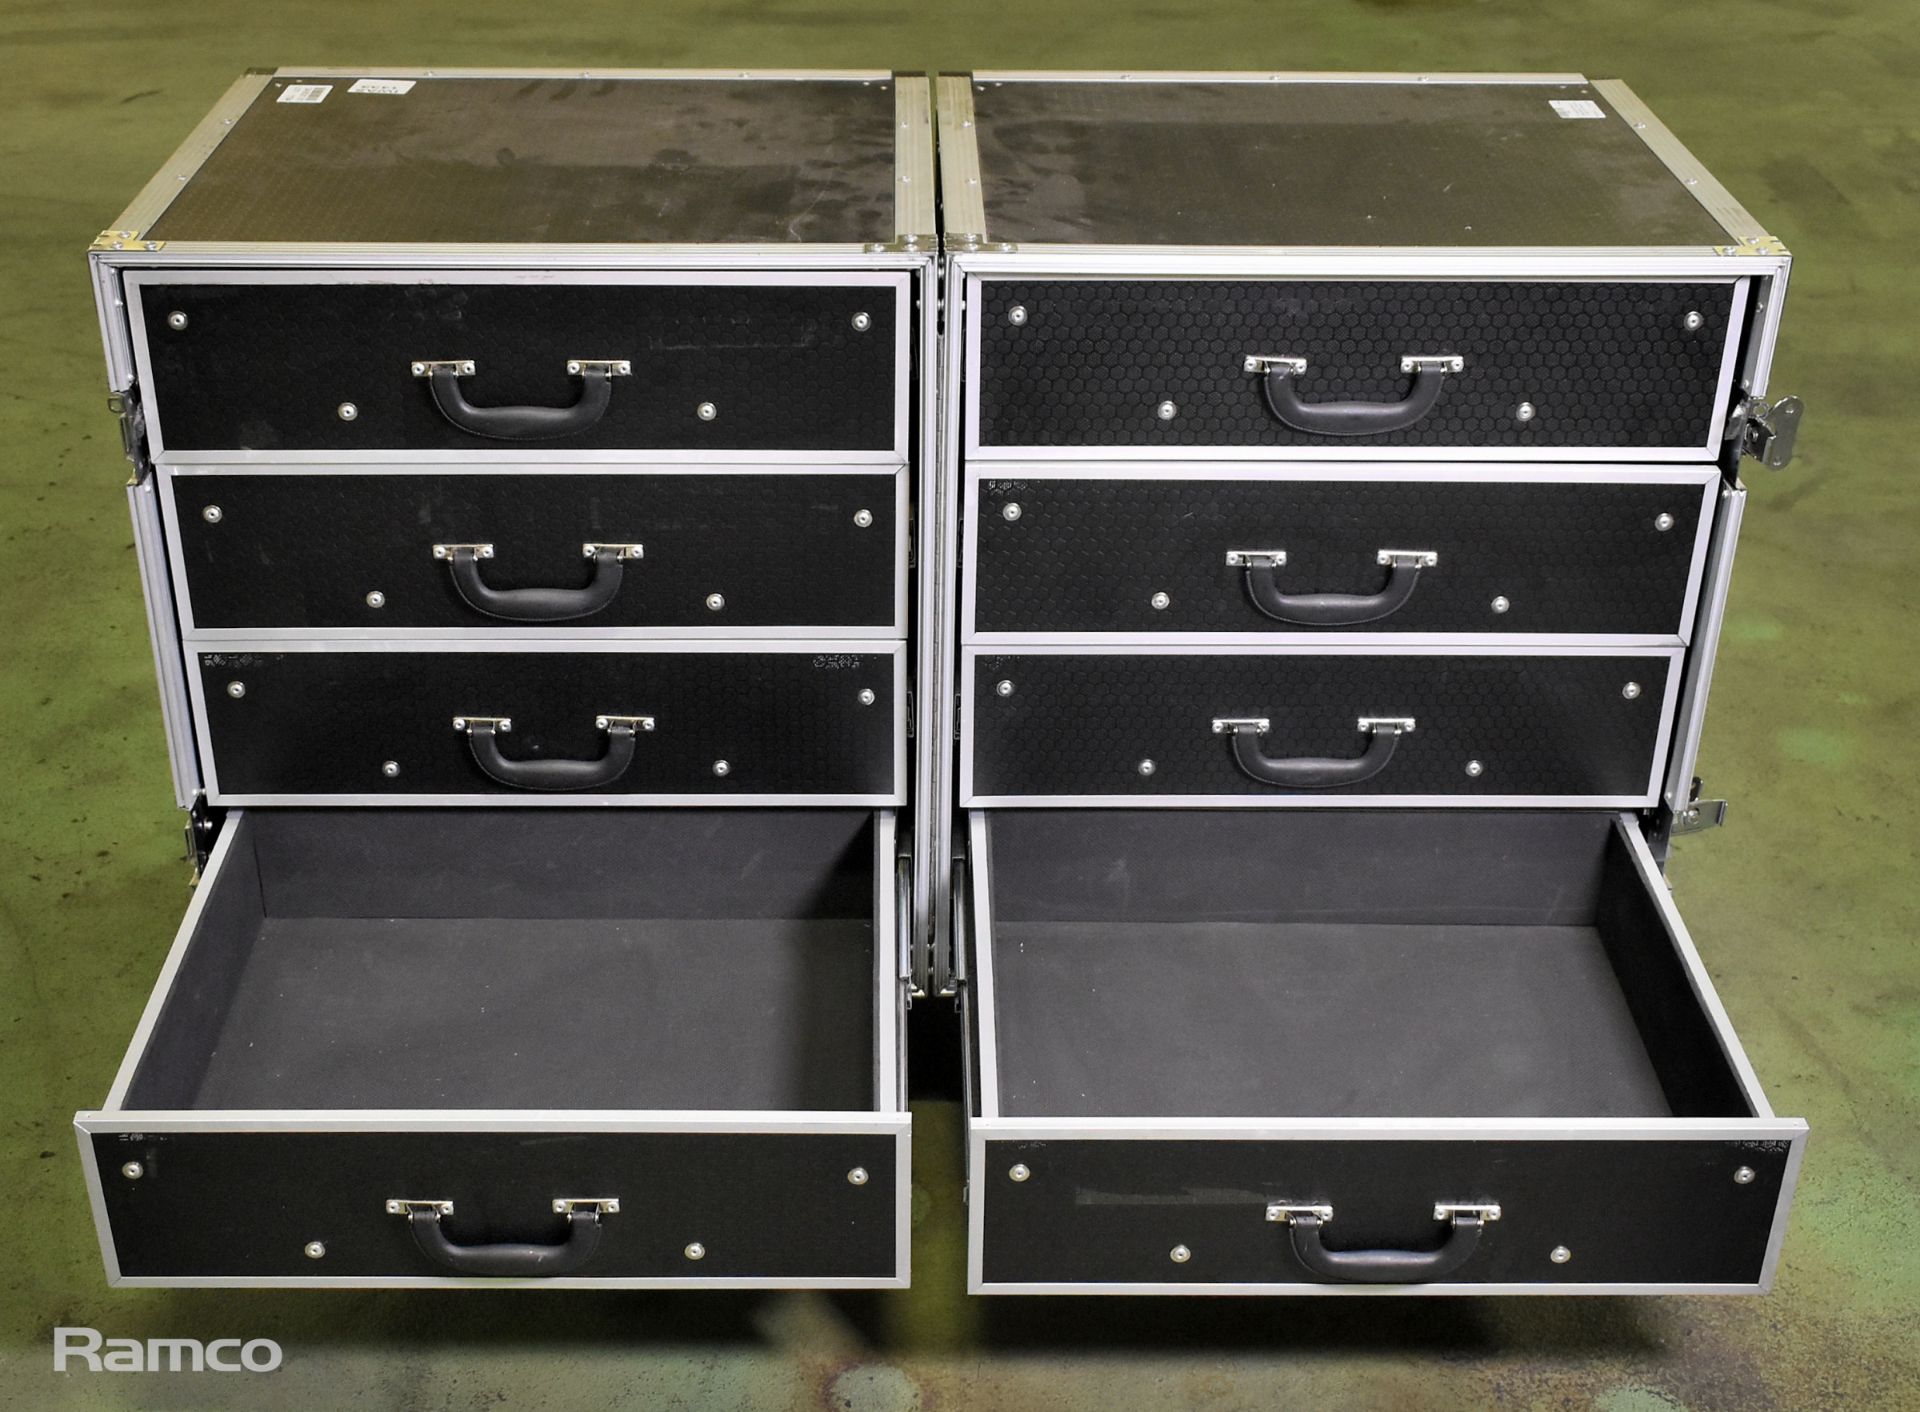 Wheeled flightcase with drawer system - 2 sections each with 4 drawers - L 1000 x W 610 x H 790mm - Image 2 of 6